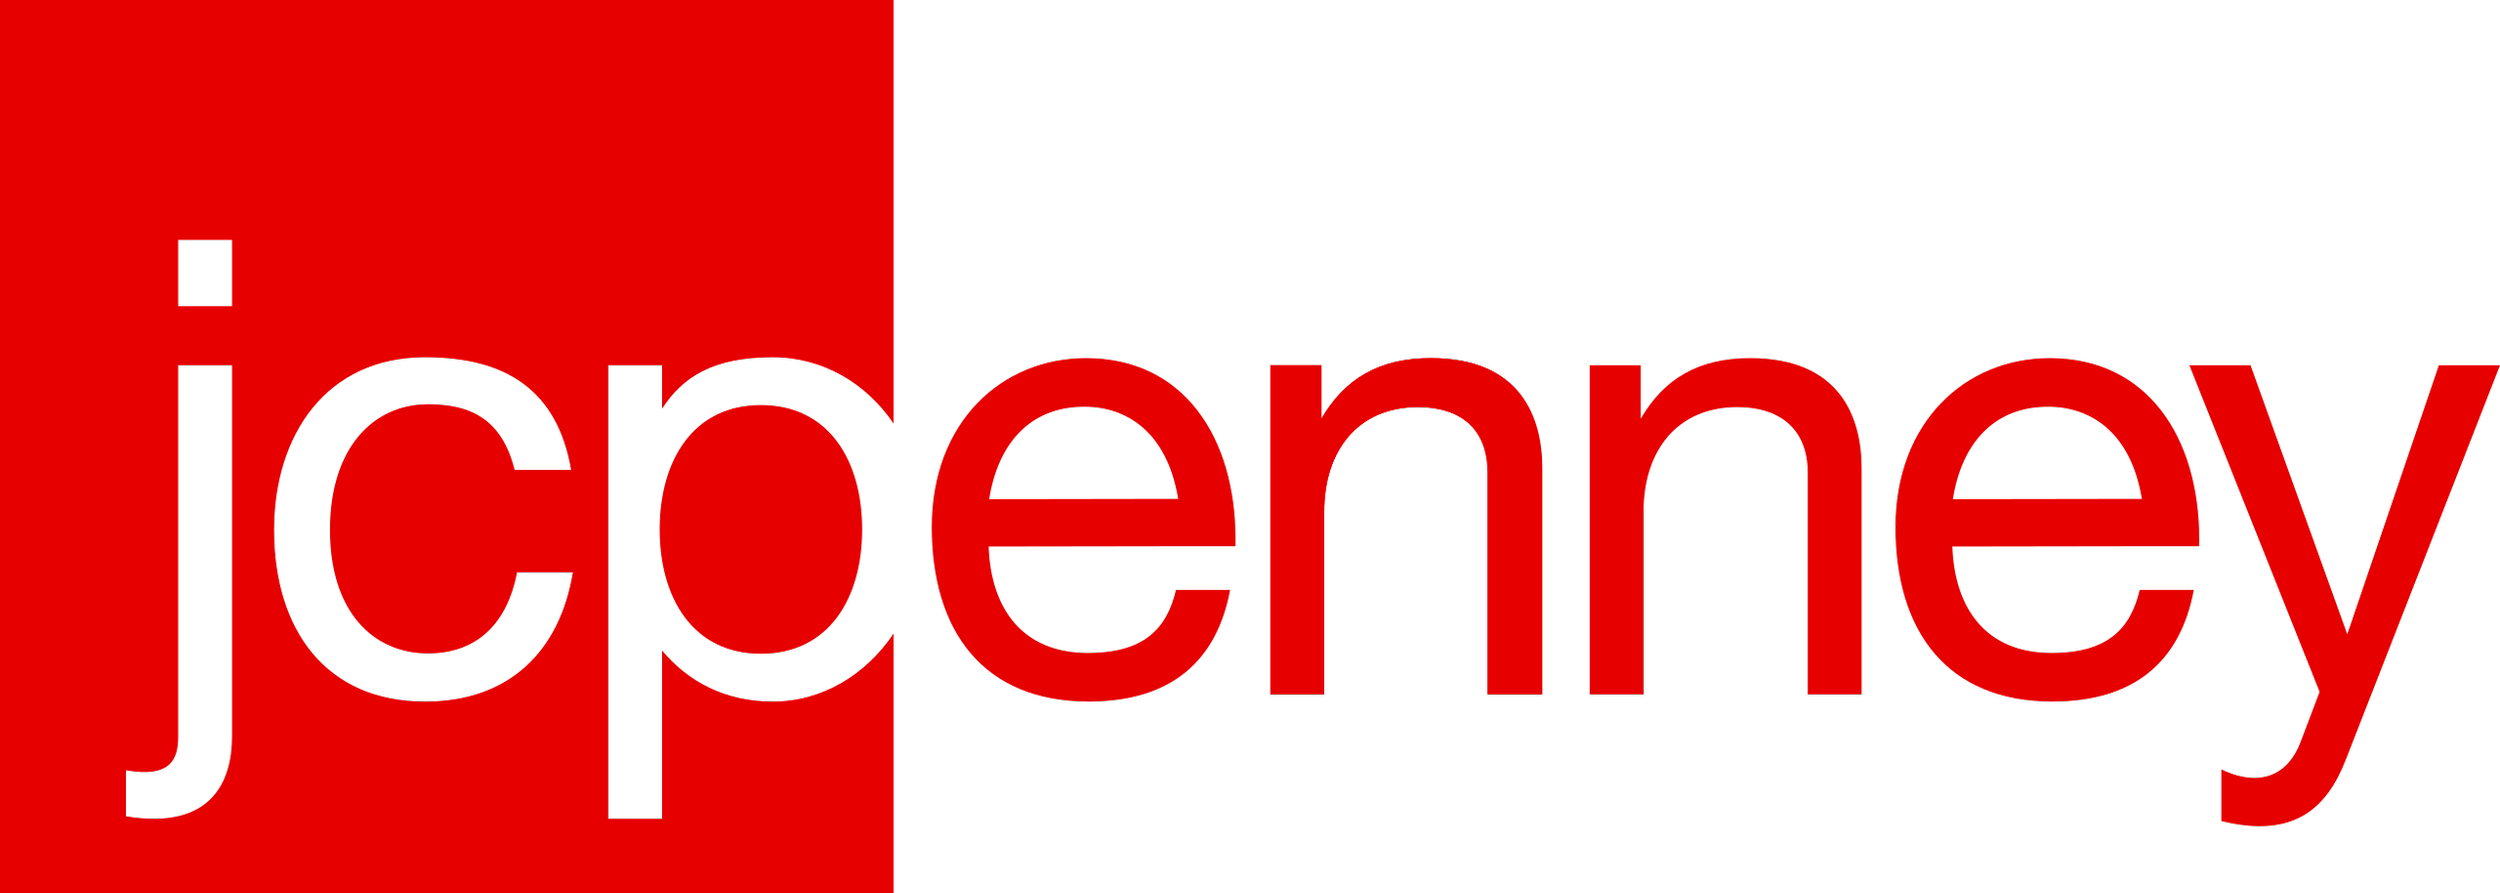 JCPenney_logo_2011.svg.png